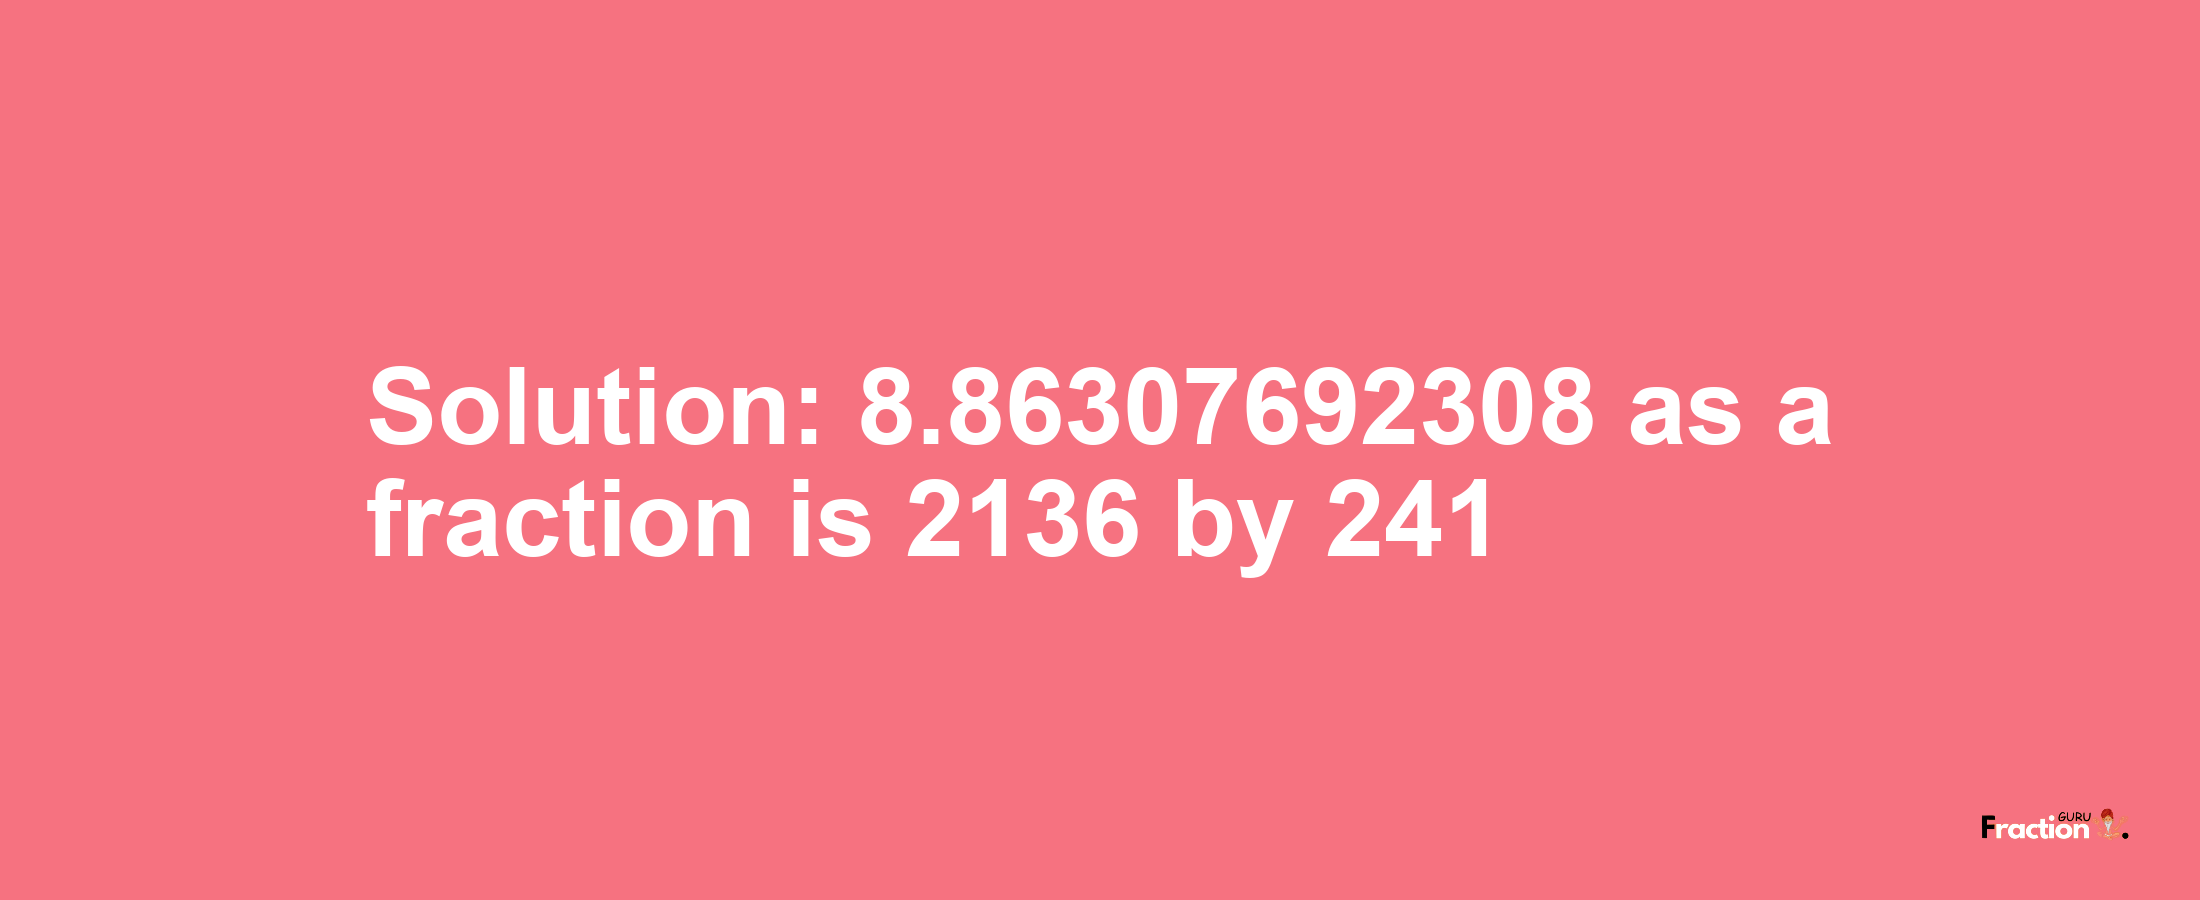 Solution:8.86307692308 as a fraction is 2136/241